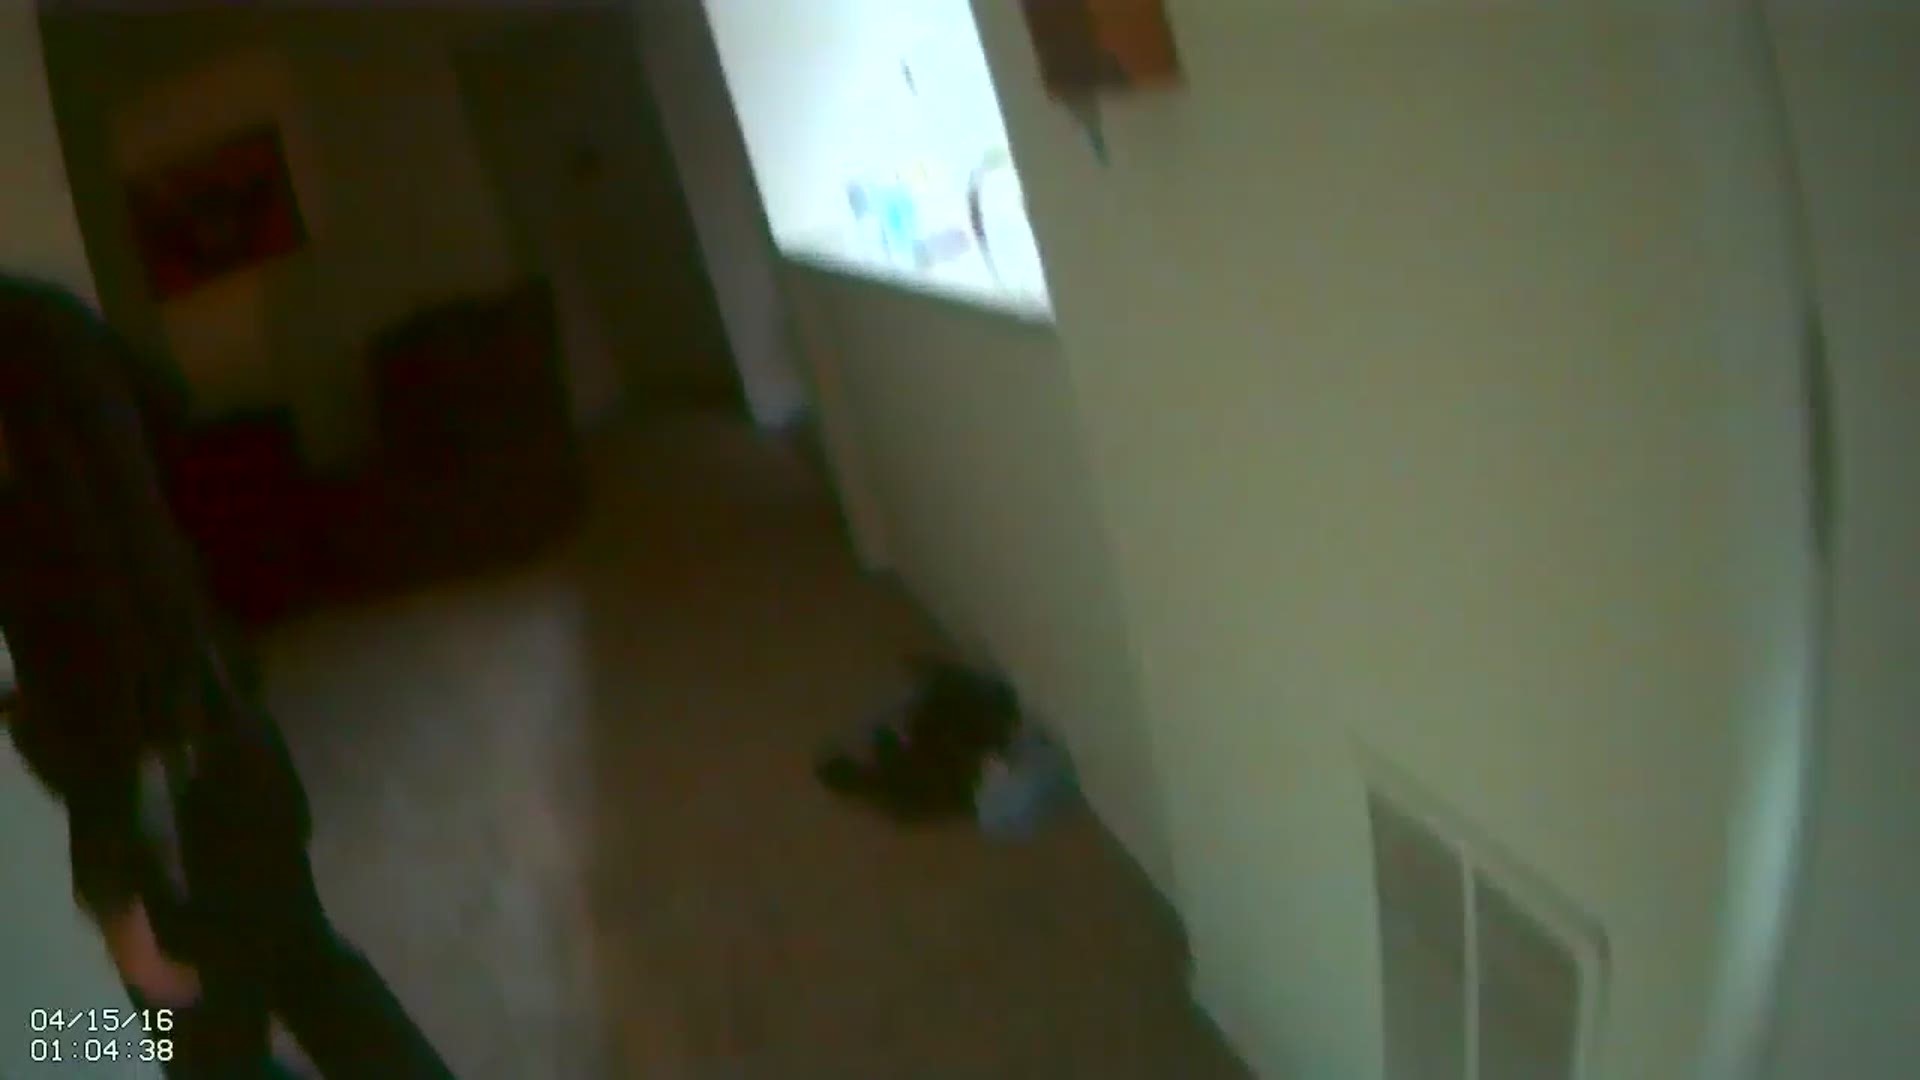 Armed with bodycams attached to their uniforms, Griffin officers burst through the door of the apartment.